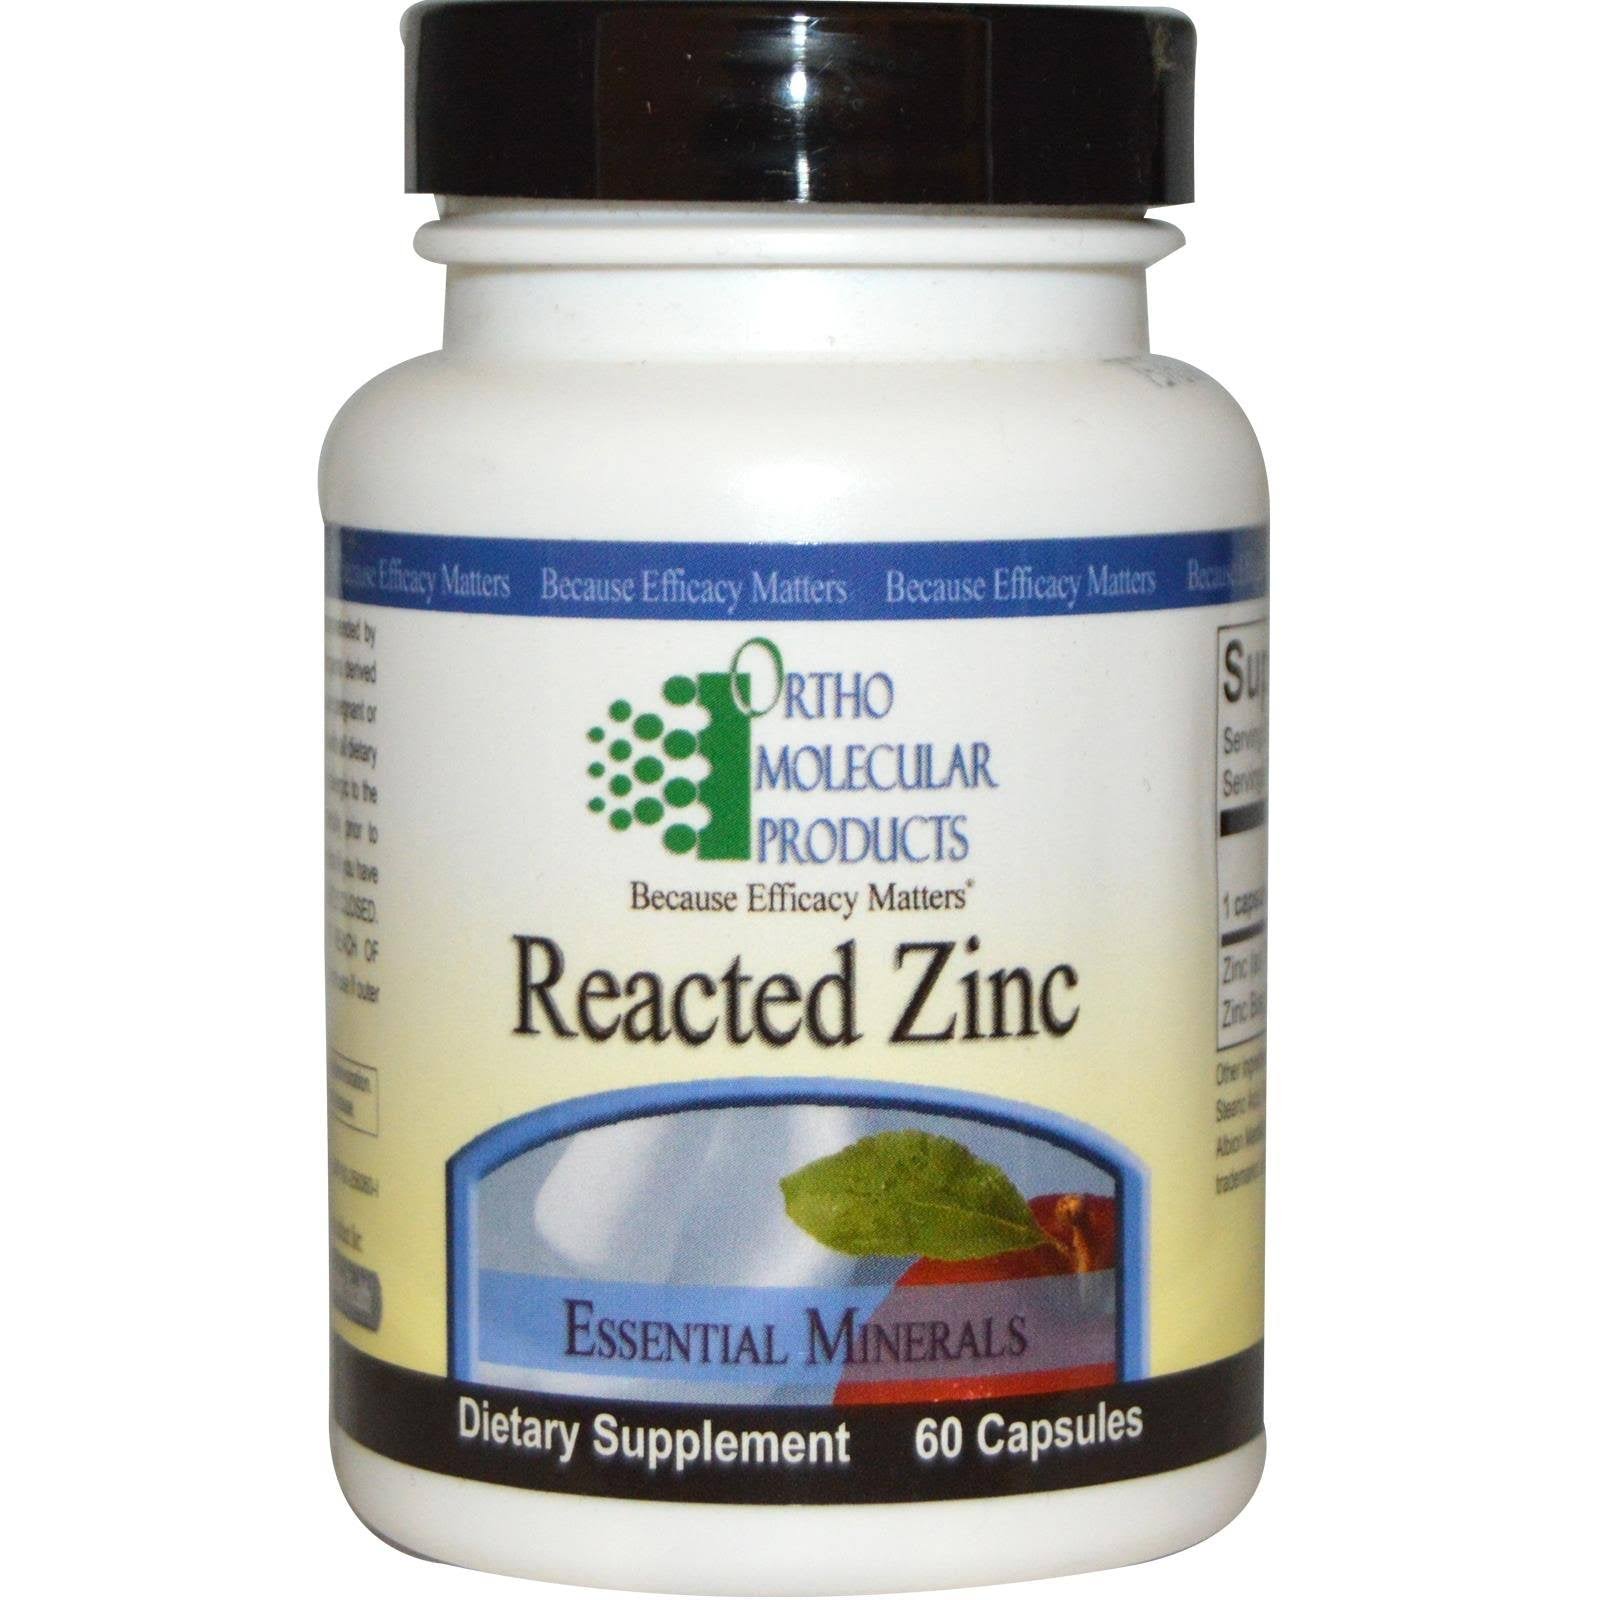 Ortho Molecular Products Reacted Zinc Essential Minerals - 60ct